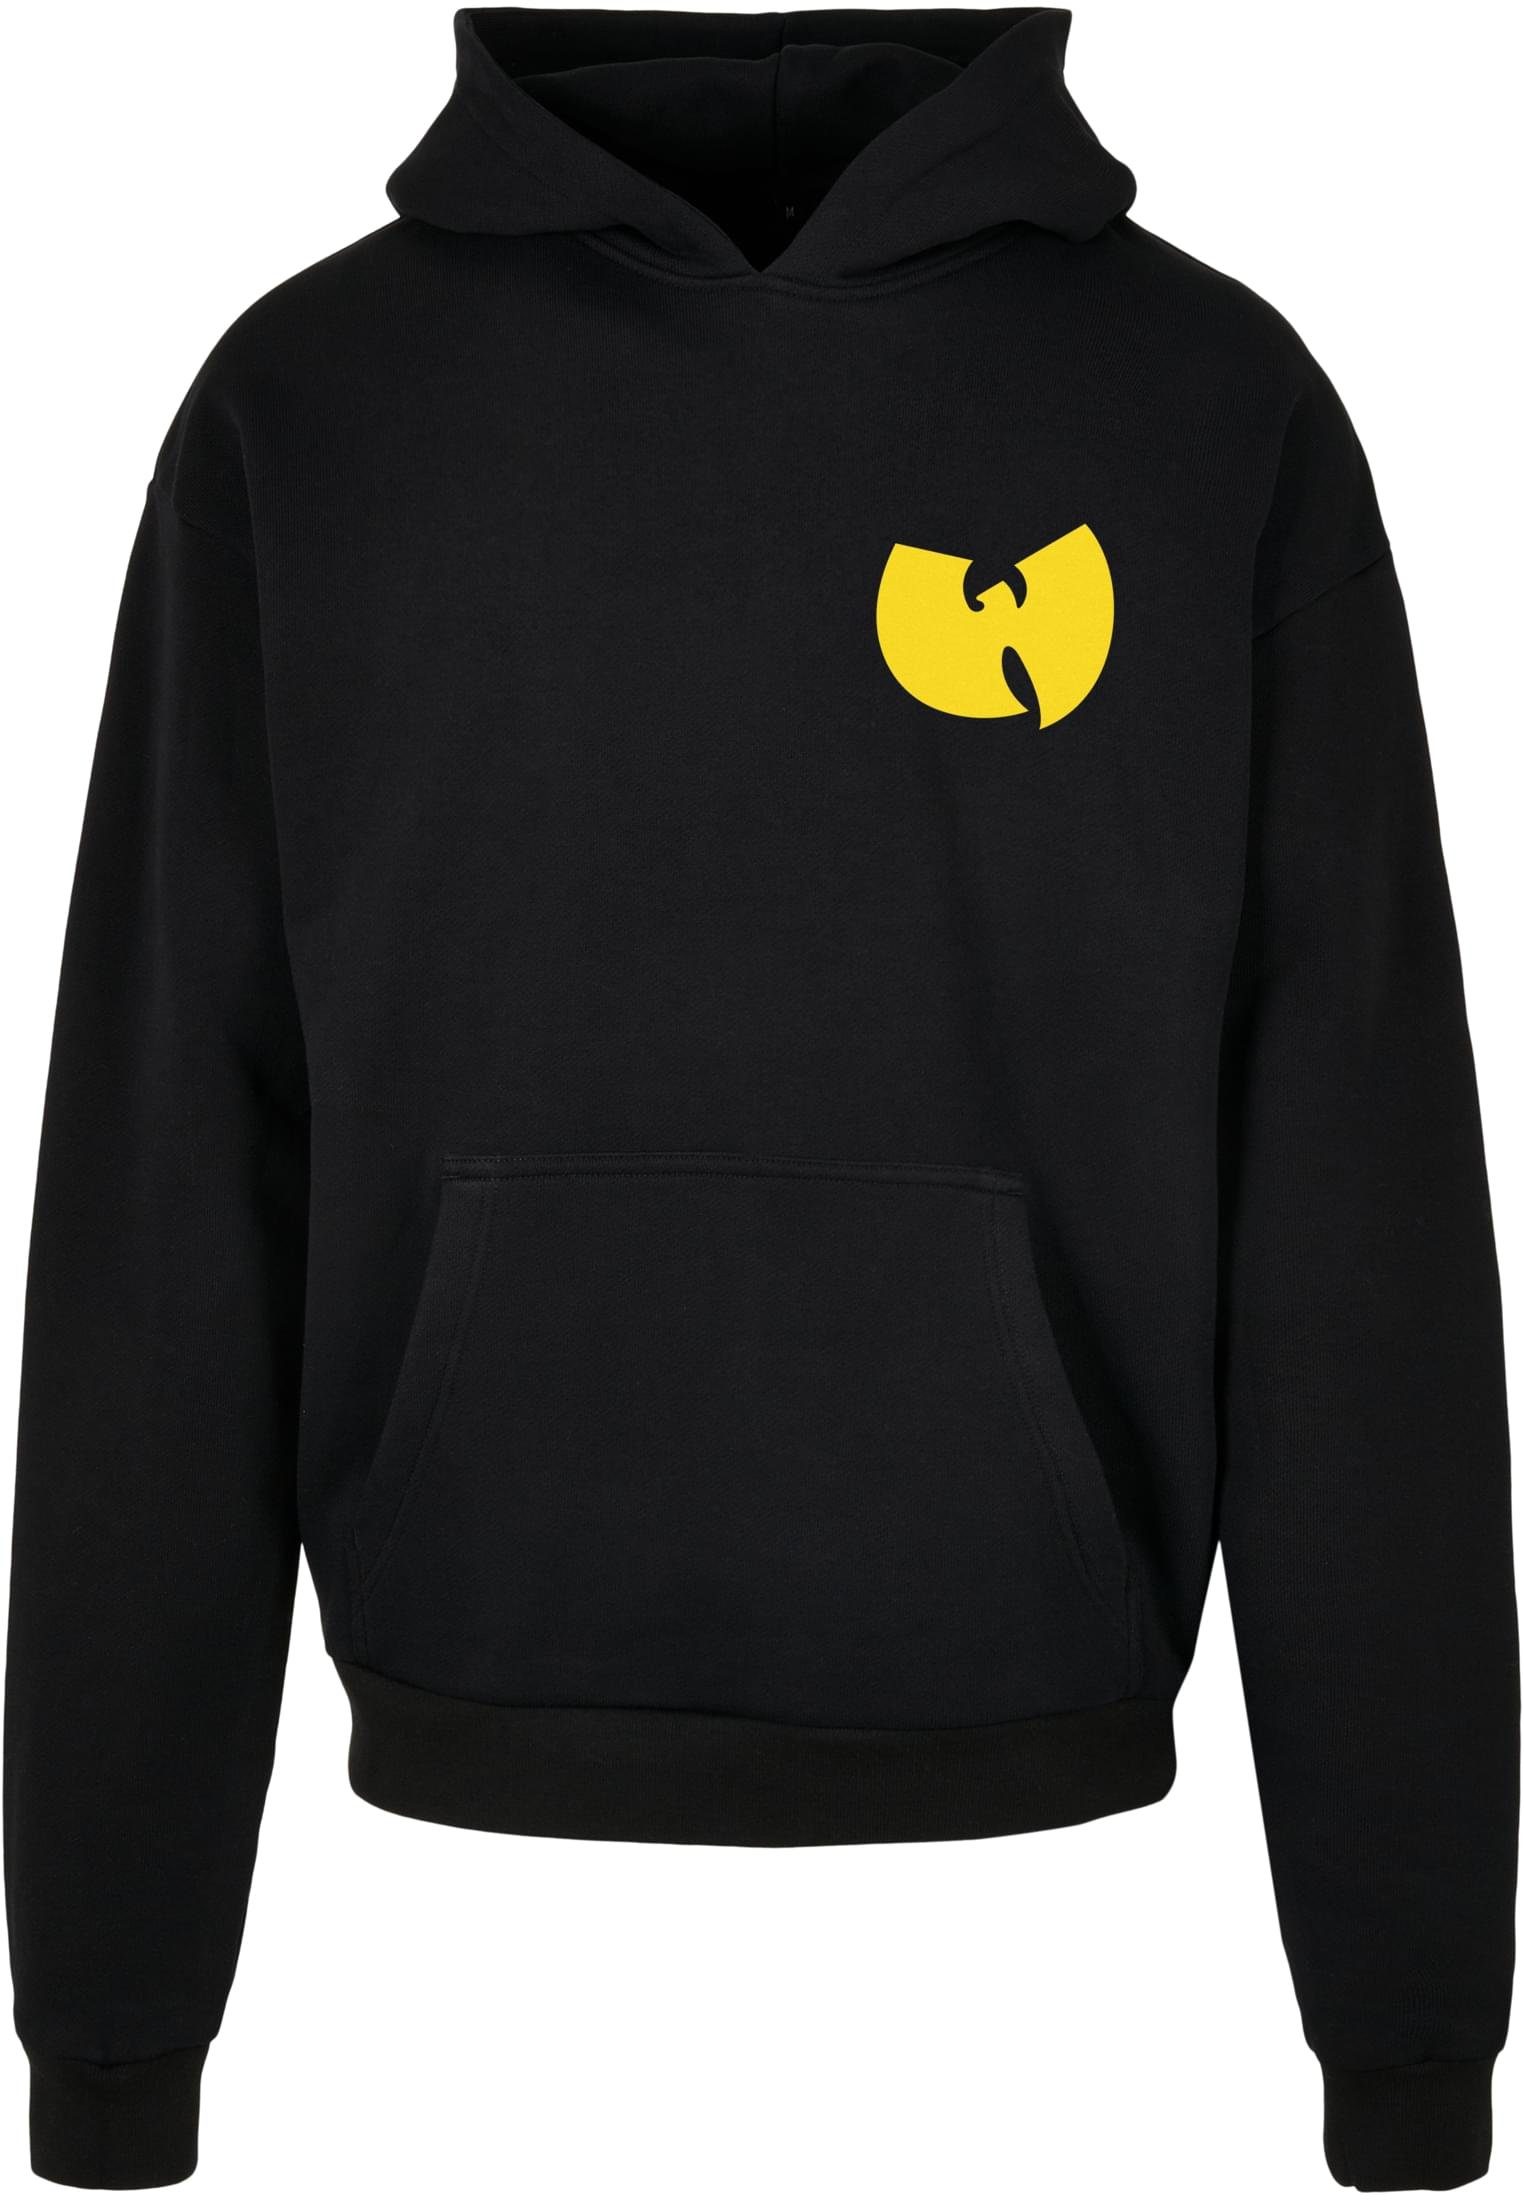 Loves (1-tlg) Sweater Upscale by Tee Mister NY Tang Herren Hoody WU